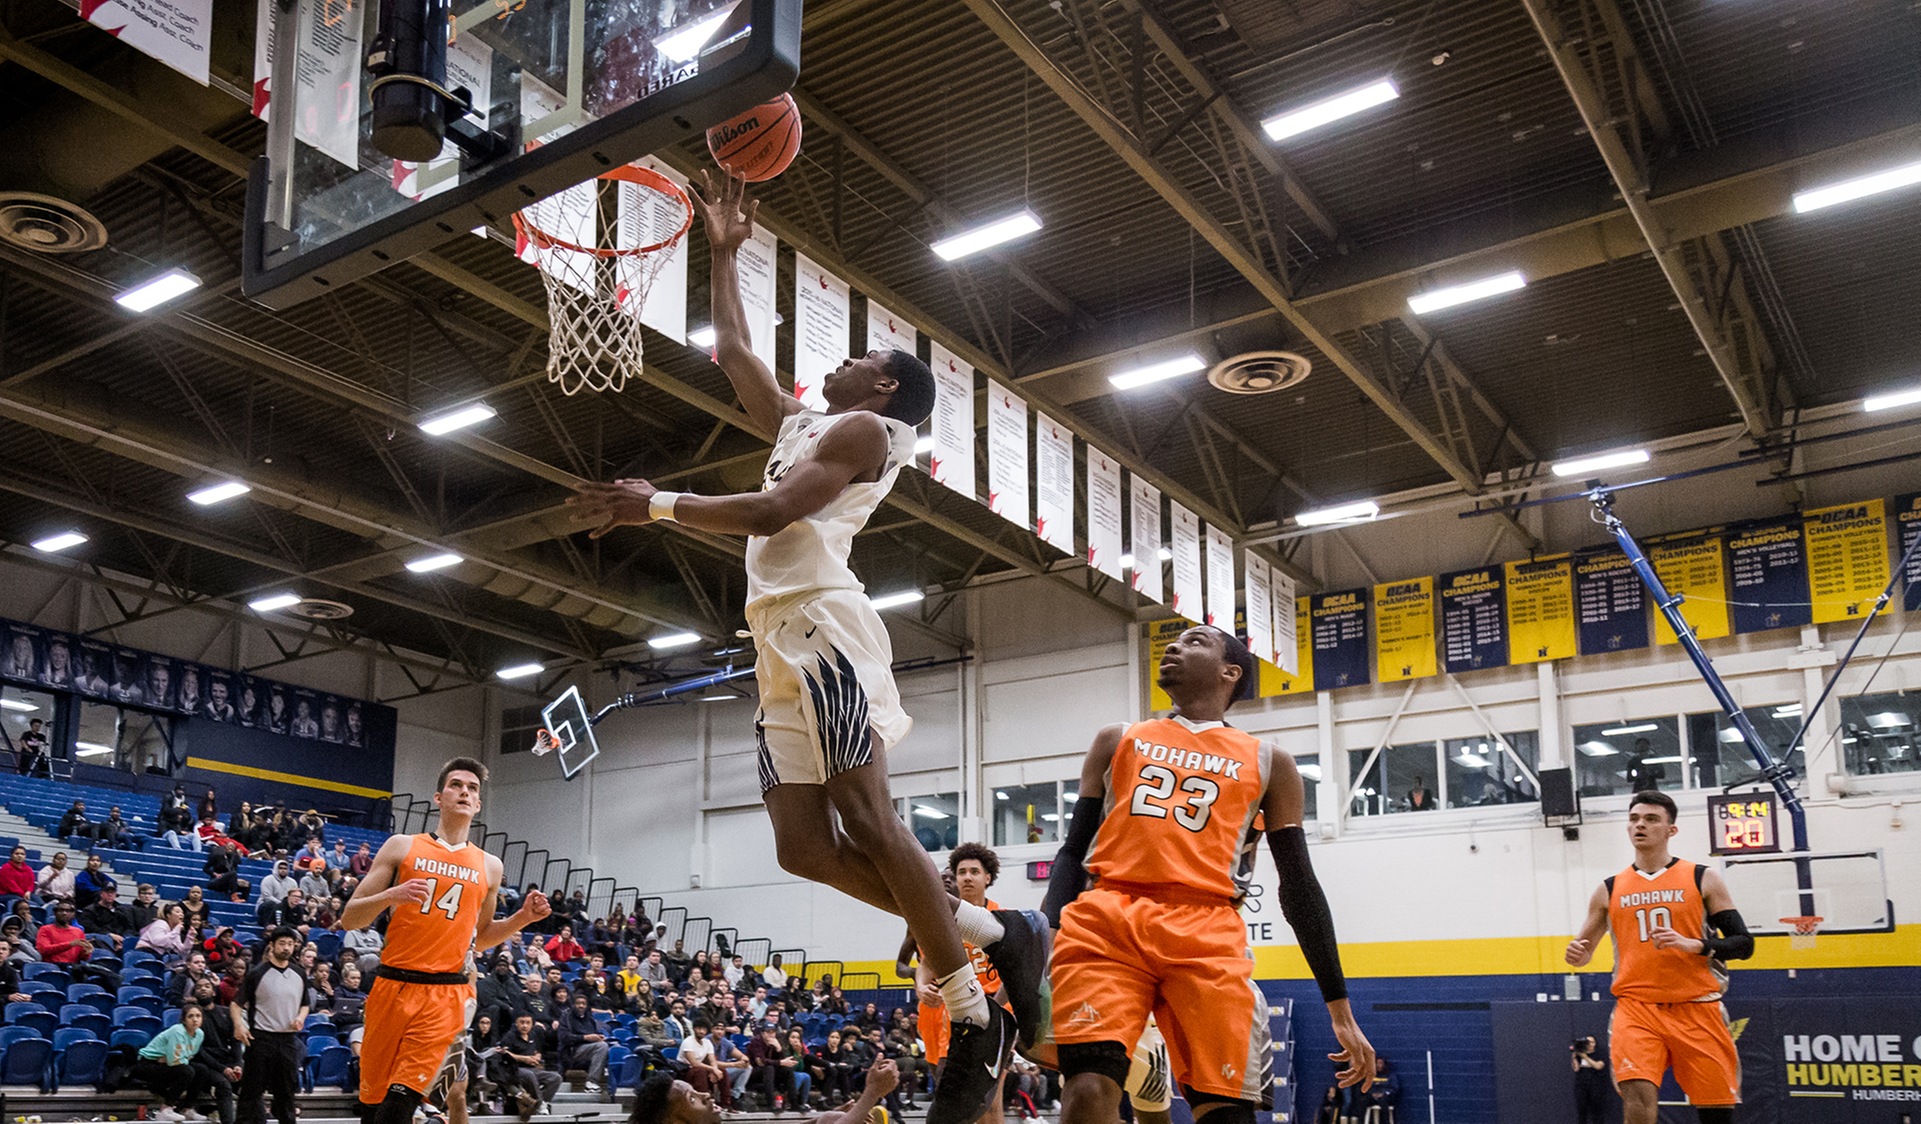 No. 5 MEN'S BASKETBALL RALLY FROM BEHIND TO BEAT MOHAWK, 92-84